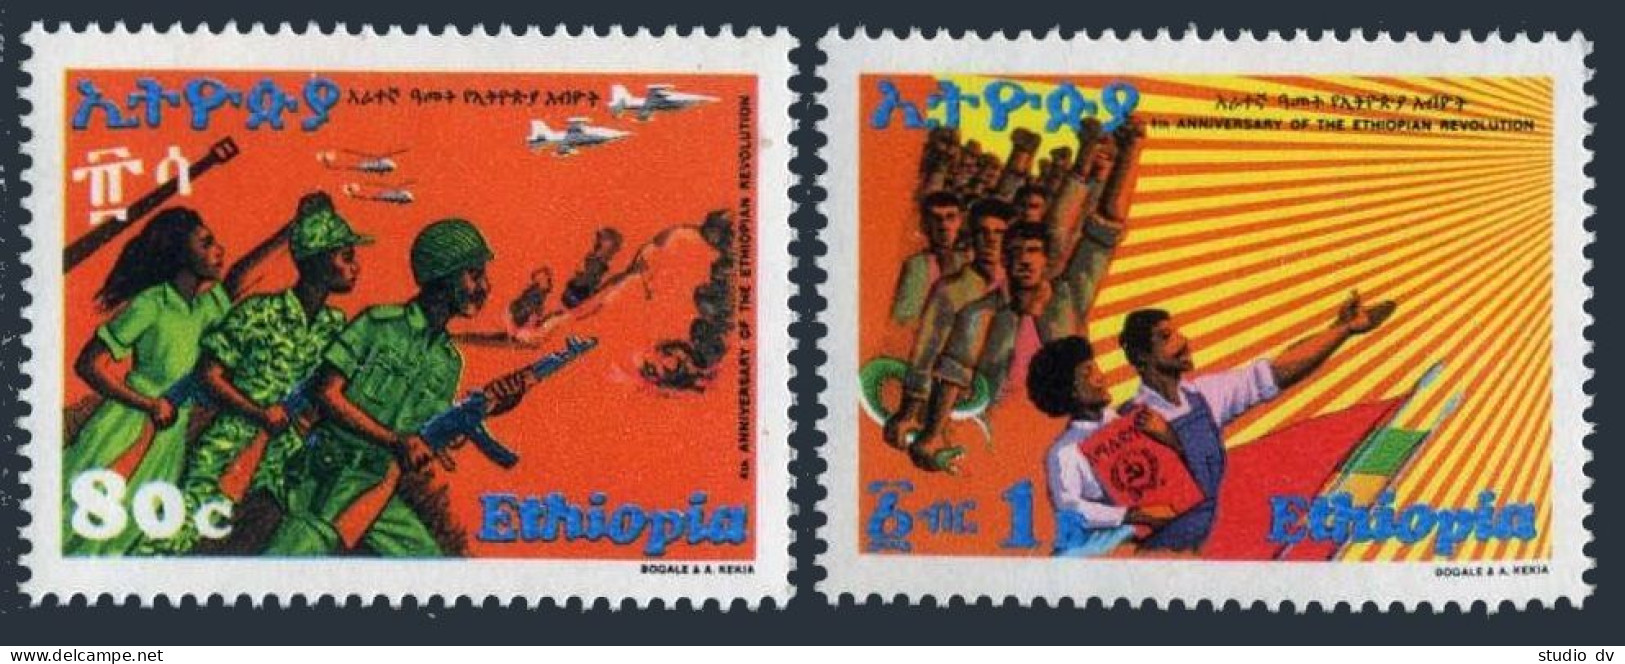 Ethiopia 894-895, MNH. Michel 980-981. Jet, Helicopters, Snake, Flags. 1978. - Ethiopië